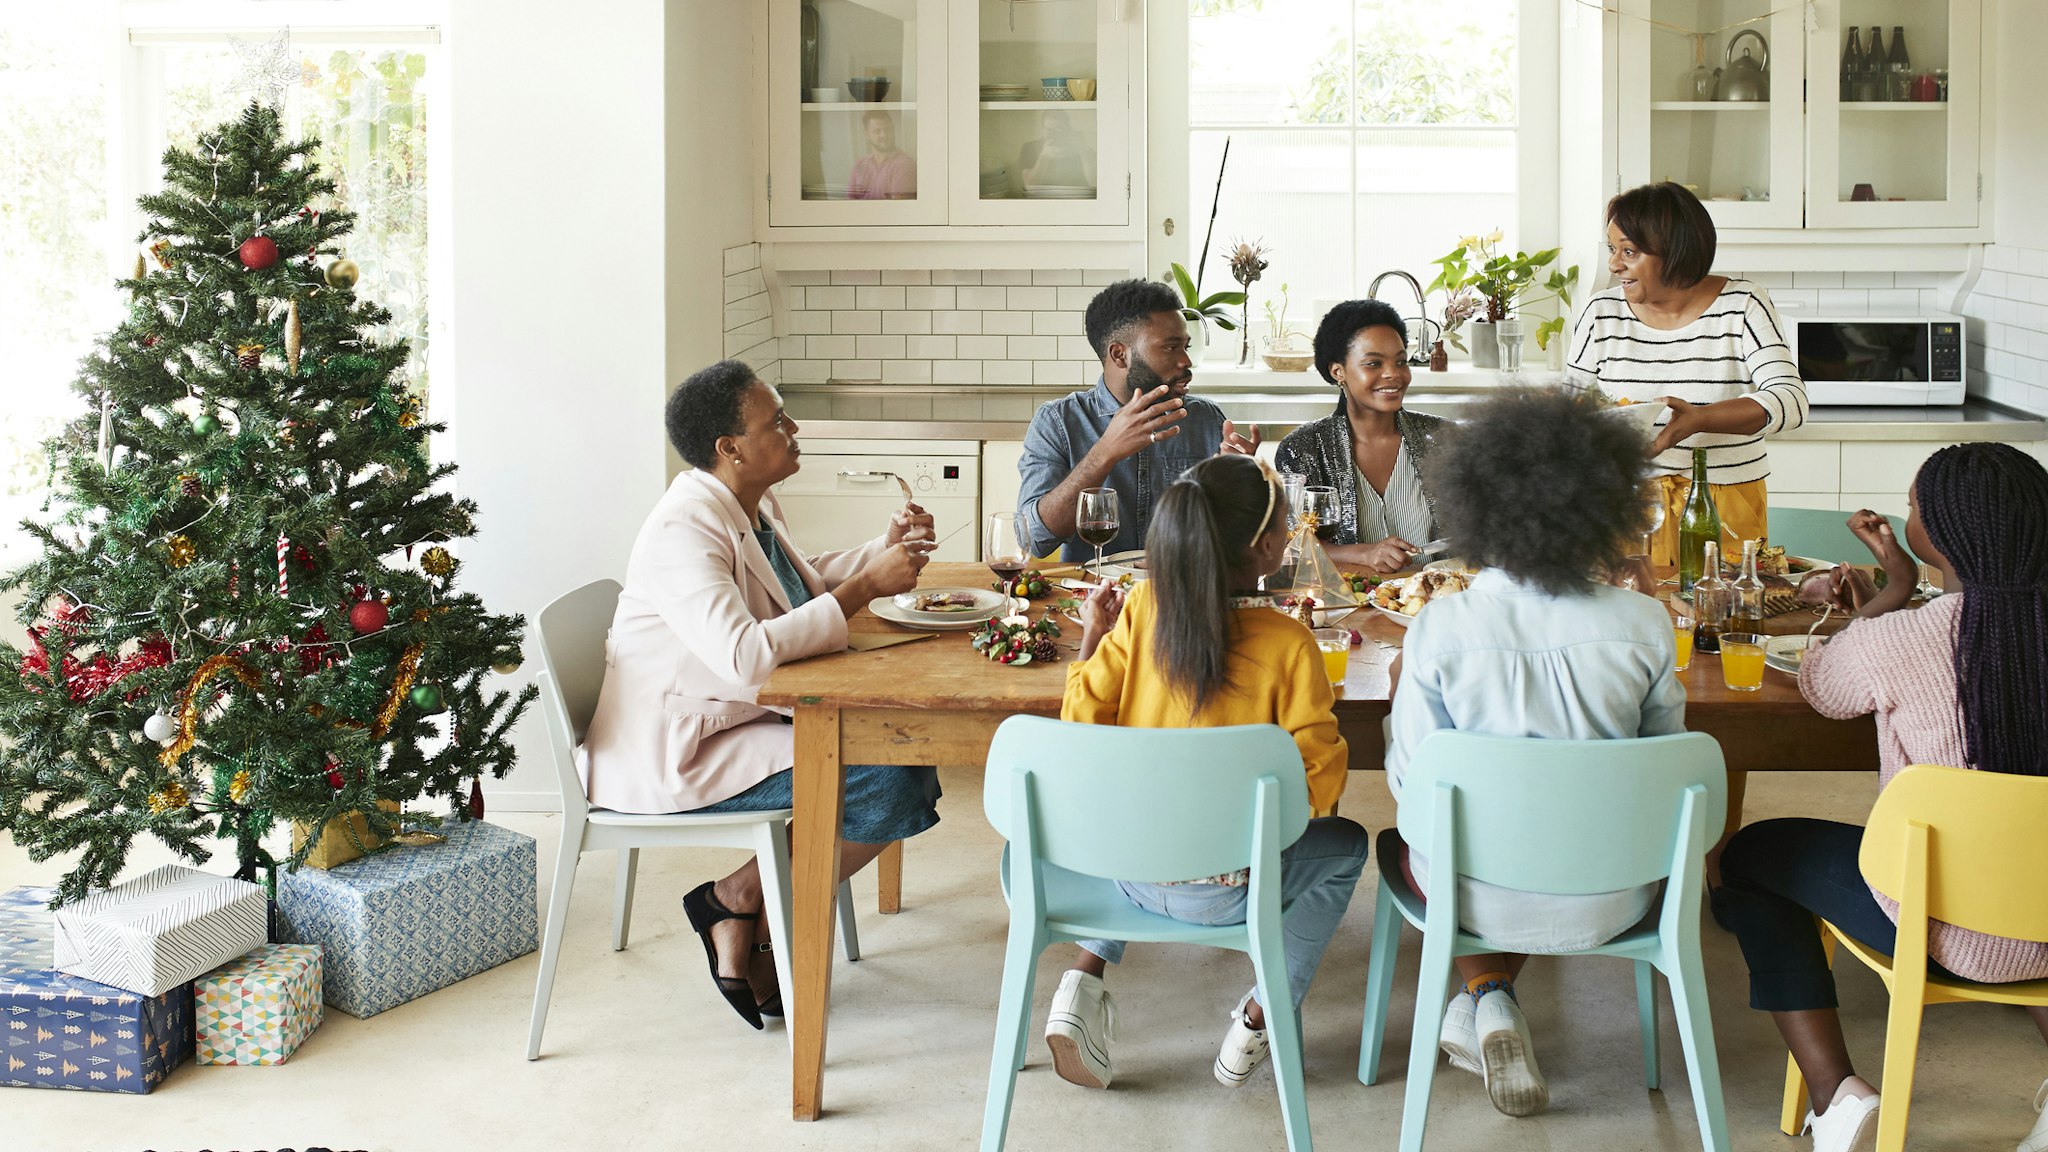 Family and friends talking while enjoying meal - stock photo